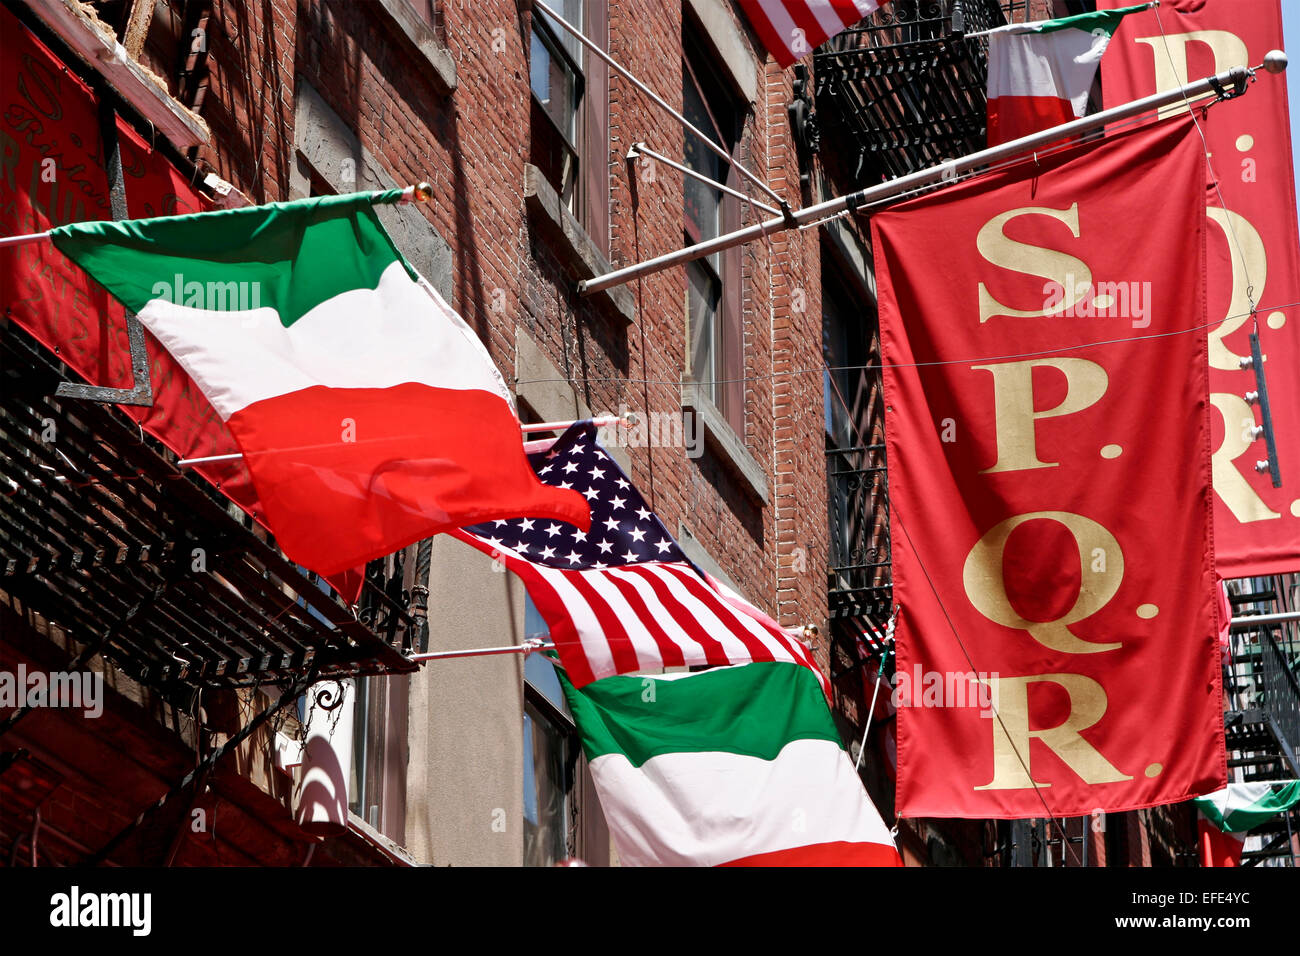 Flags, italian, american, s.p.q.r. at the colorful and picturesque Little Italy neighborhood. Manhattan, New York, NY, USA, United States of America. Stock Photo